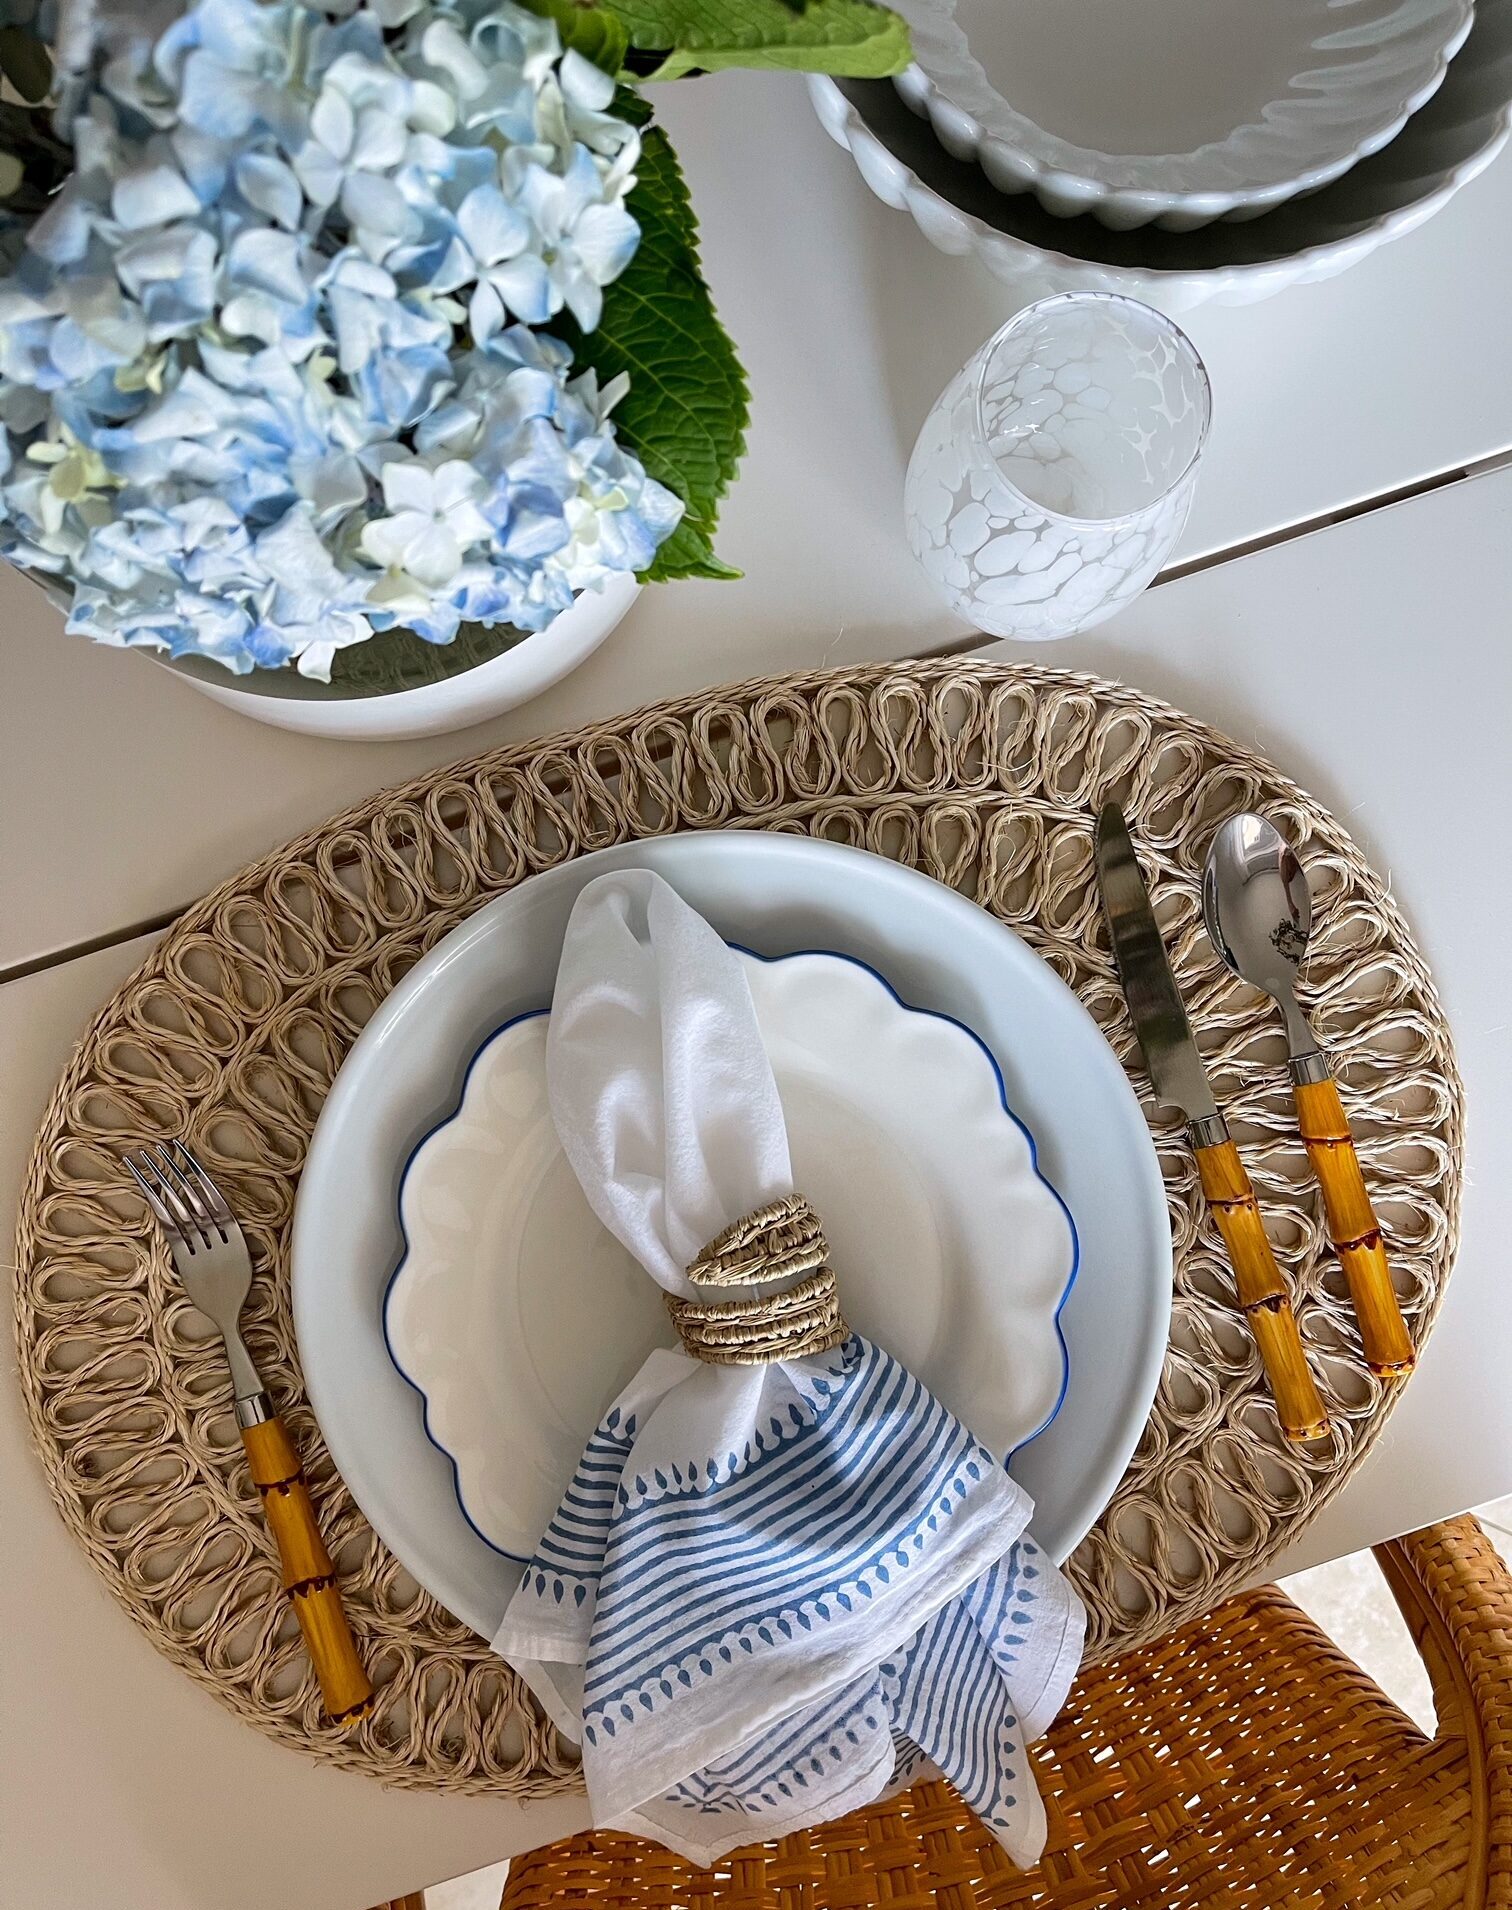 Get all the details on creating a blue and white coastal tablescape you can enjoy with your family or guests.